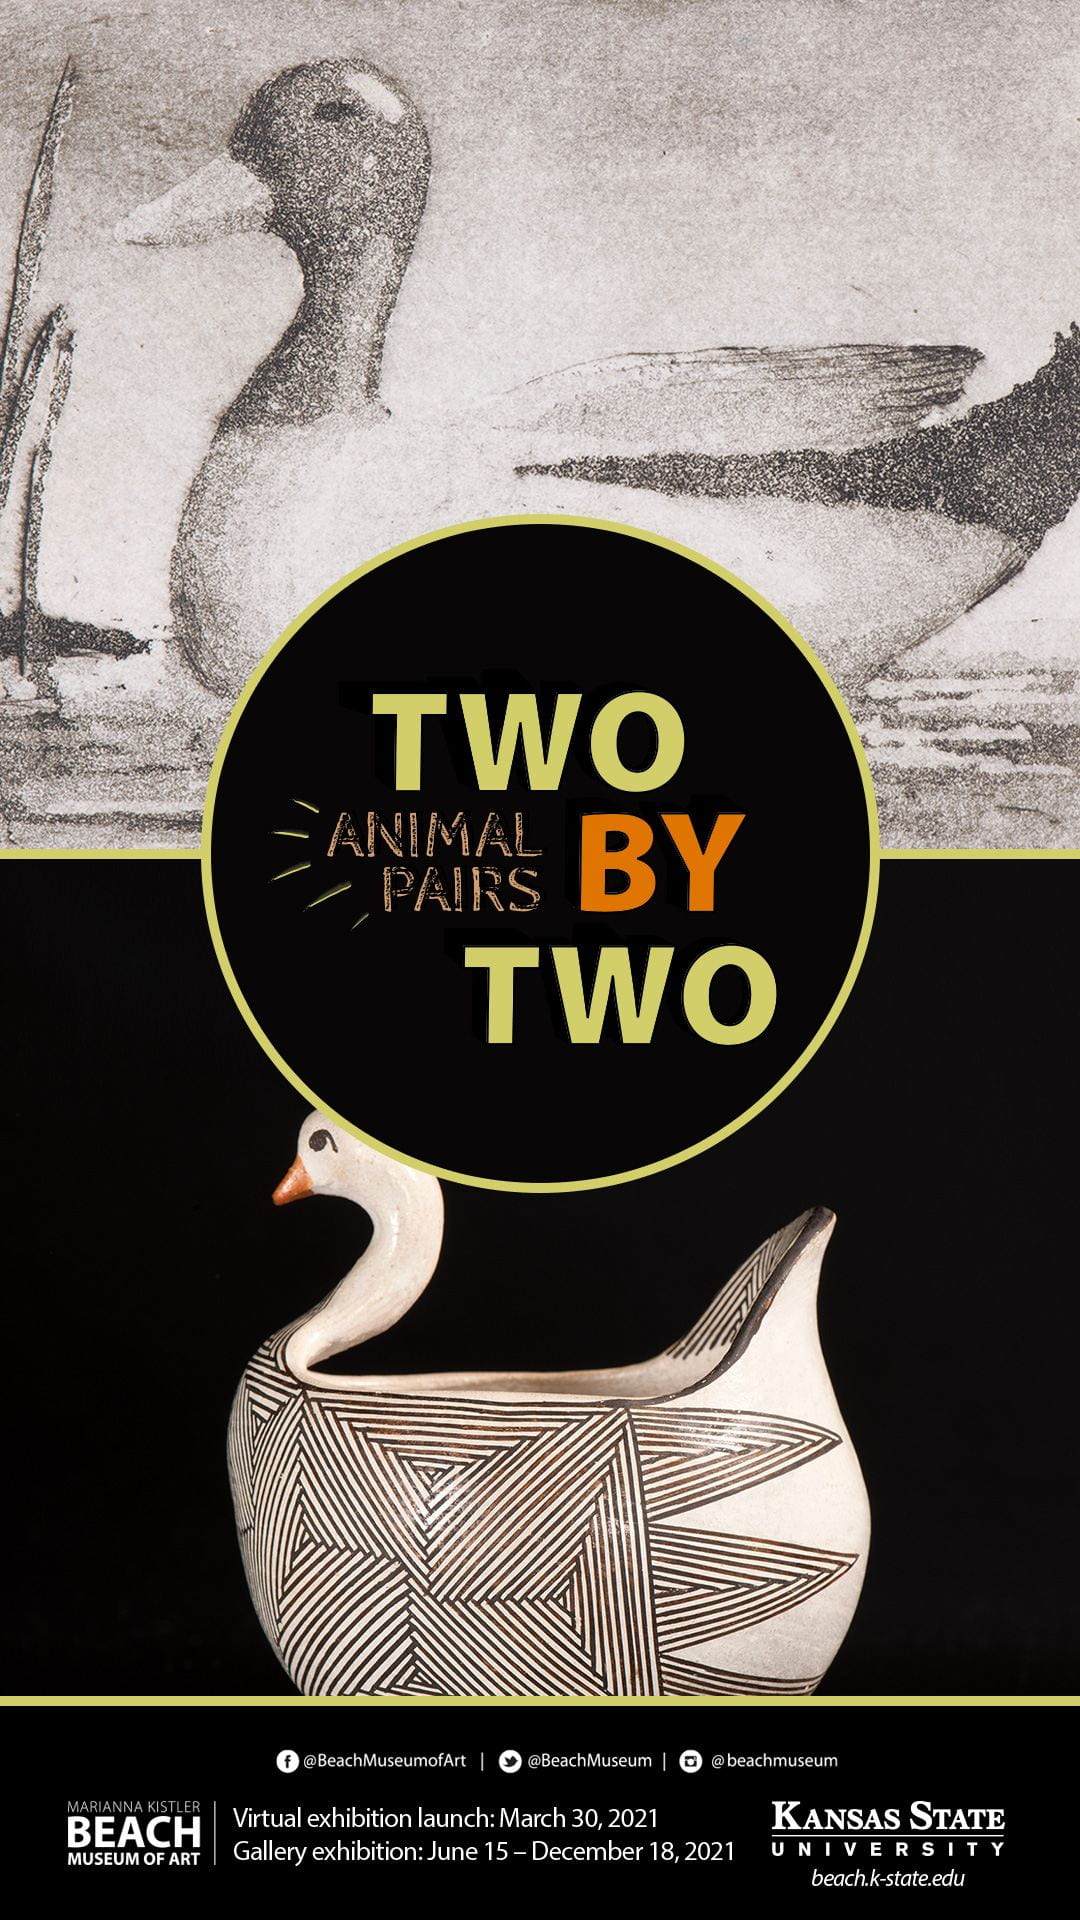 Image for Beach Museum of Art's new virtual exhibition "Two by Two: Animal Pairs." View at beach.k-state.edu/explore